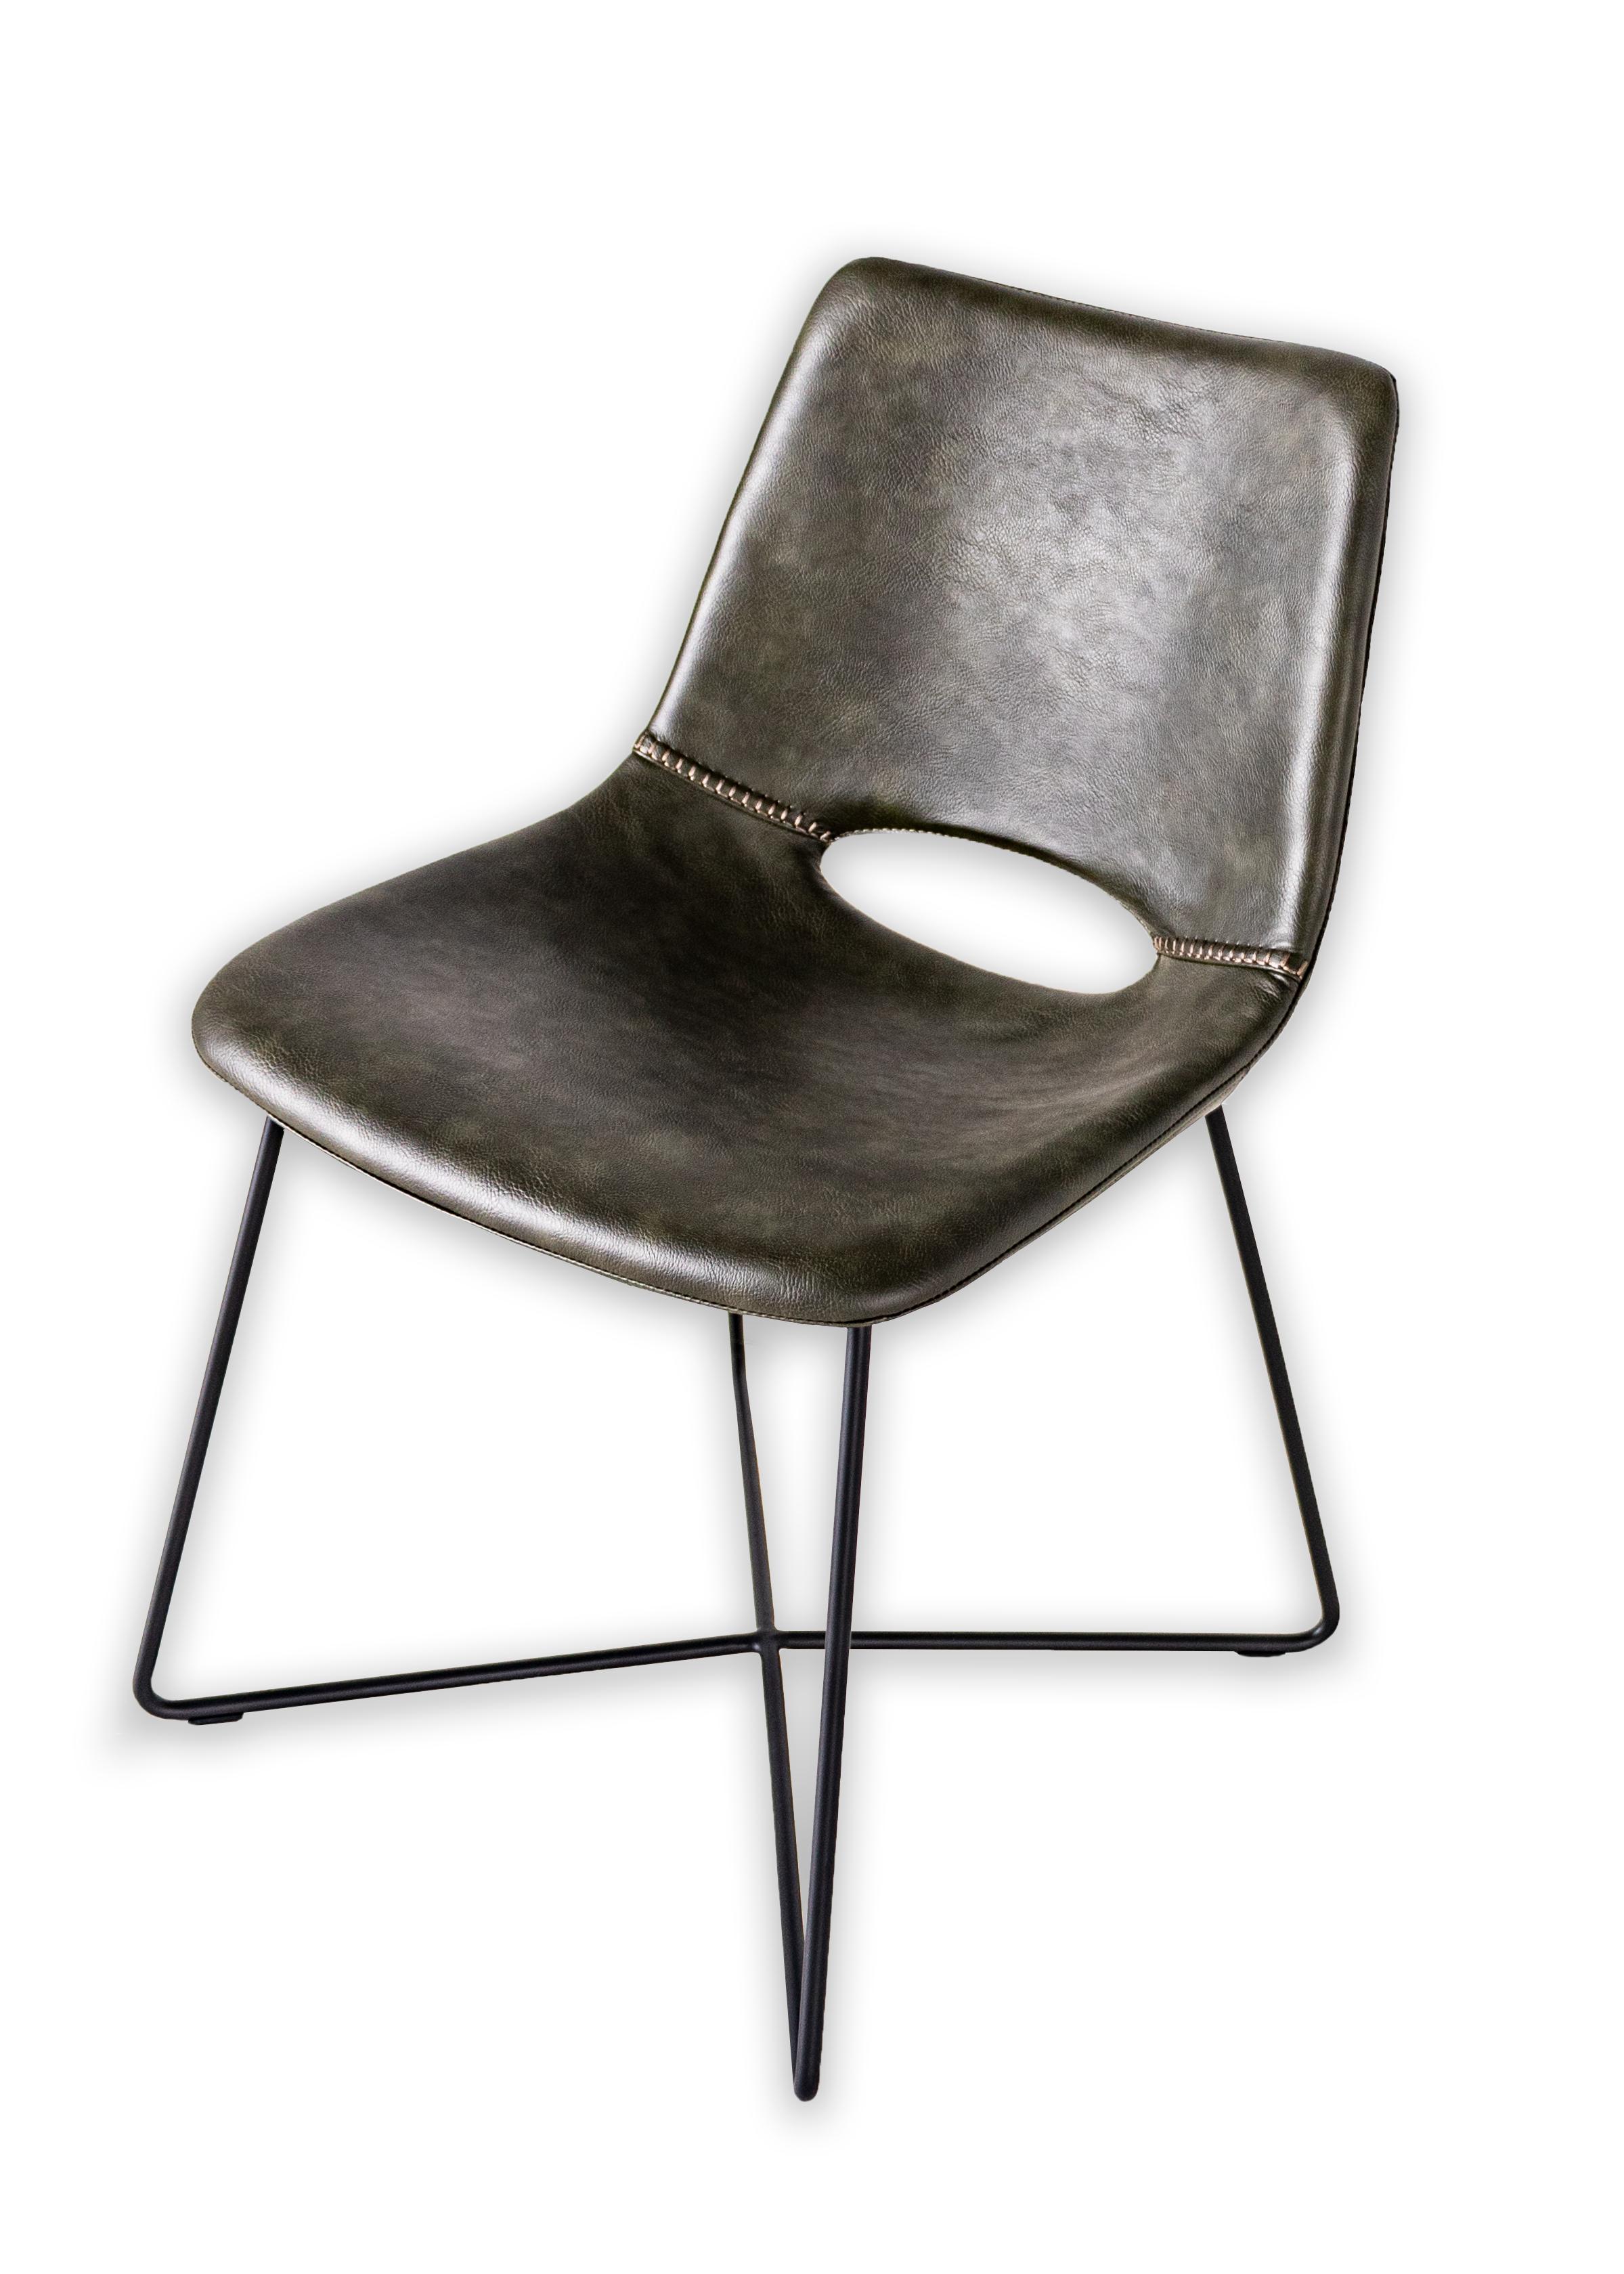 Modern leather dining chair with black steel legs.

This piece is a part of Brendan Bass’s one-of-a-kind collection, Le Monde. French for “The World”, the Le Monde collection is made up of rare and hard to find pieces curated by Brendan from estate